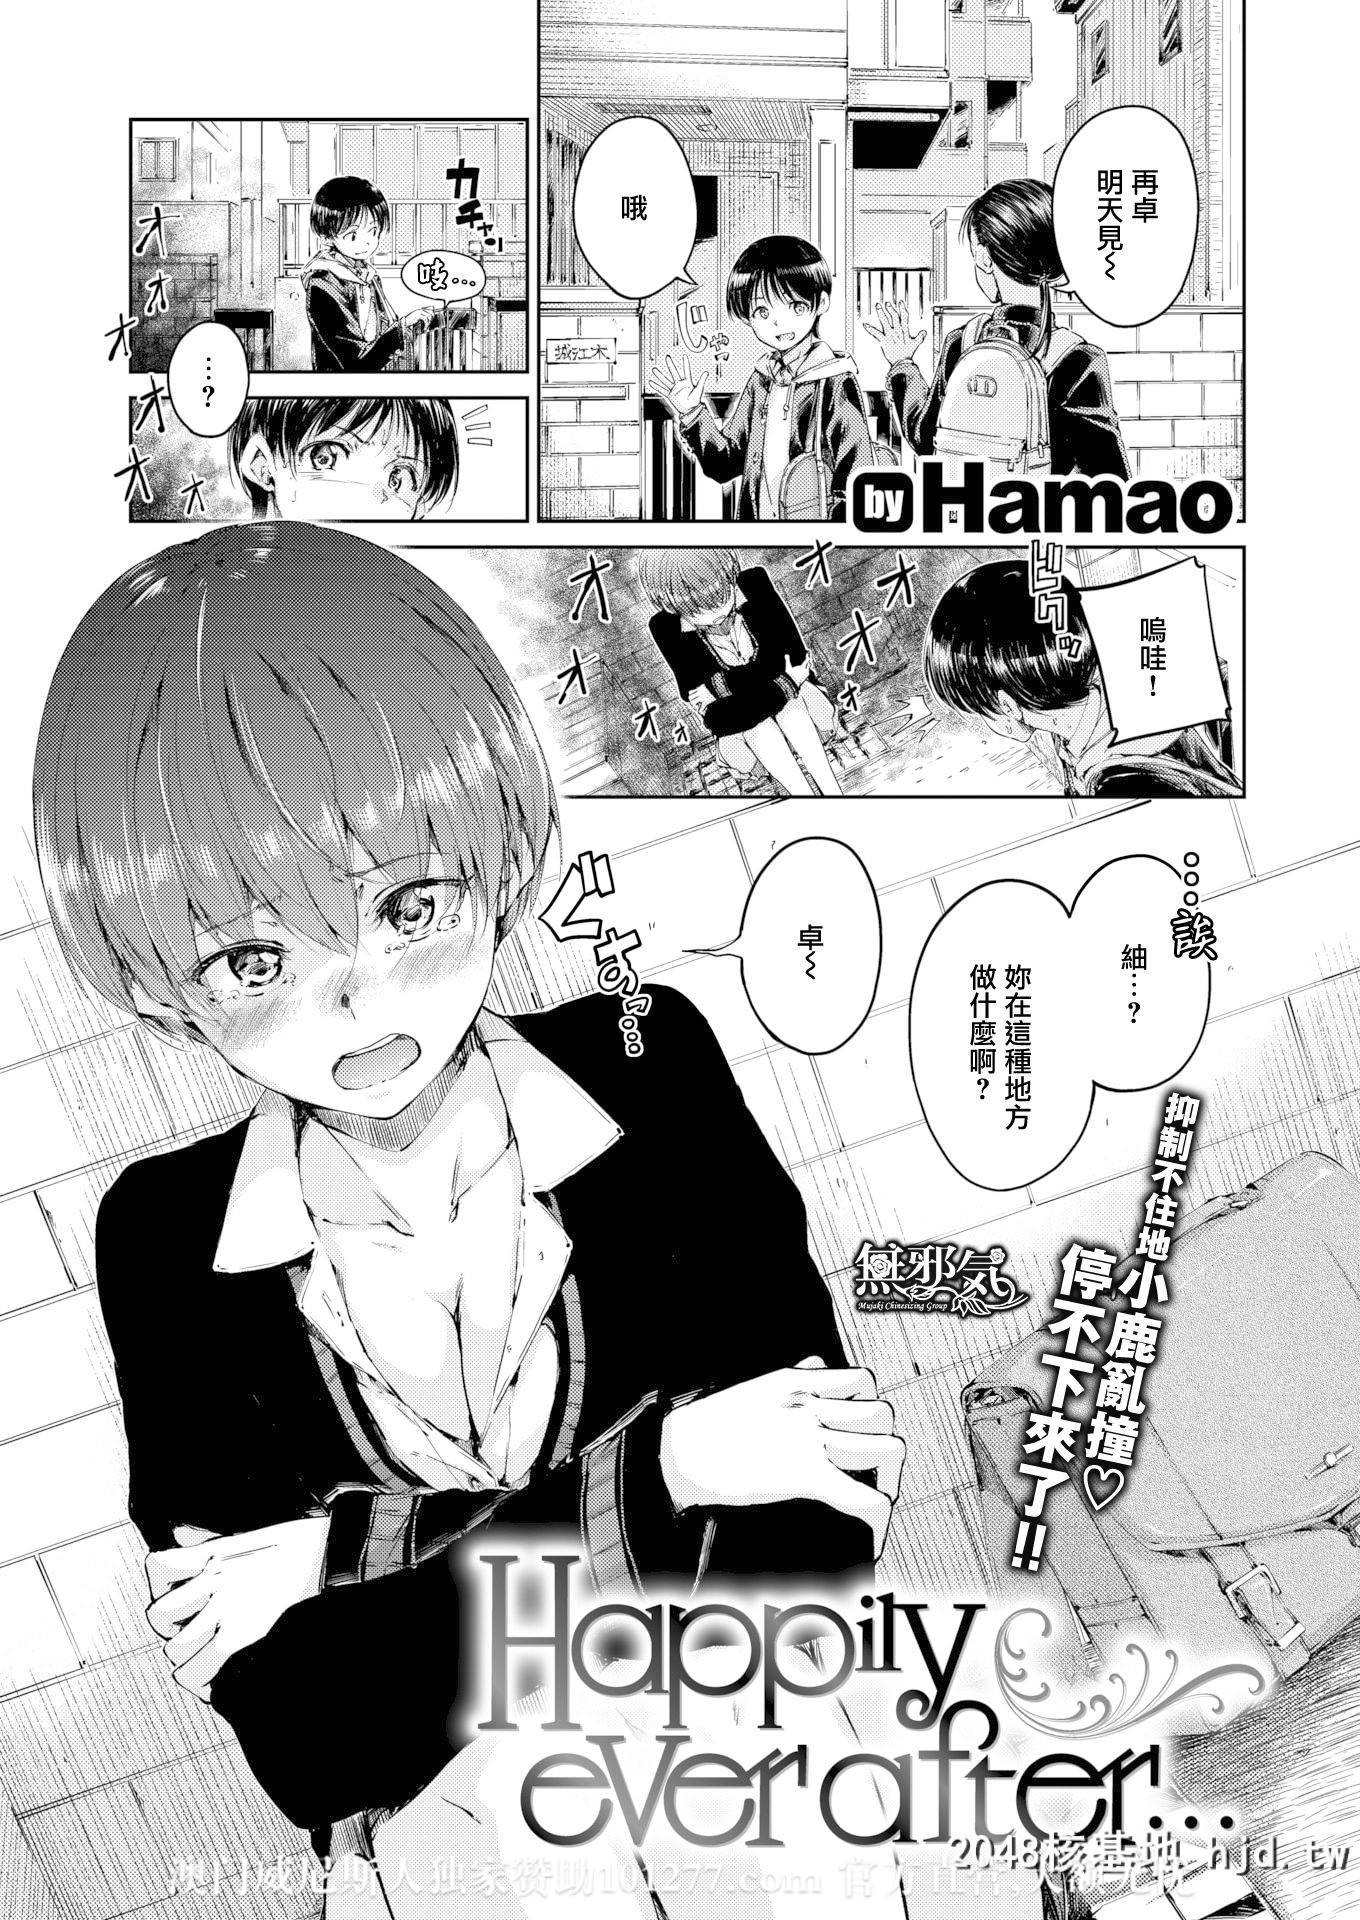 Happily ever after...( COMIC快楽天2020年4月号)(18P)